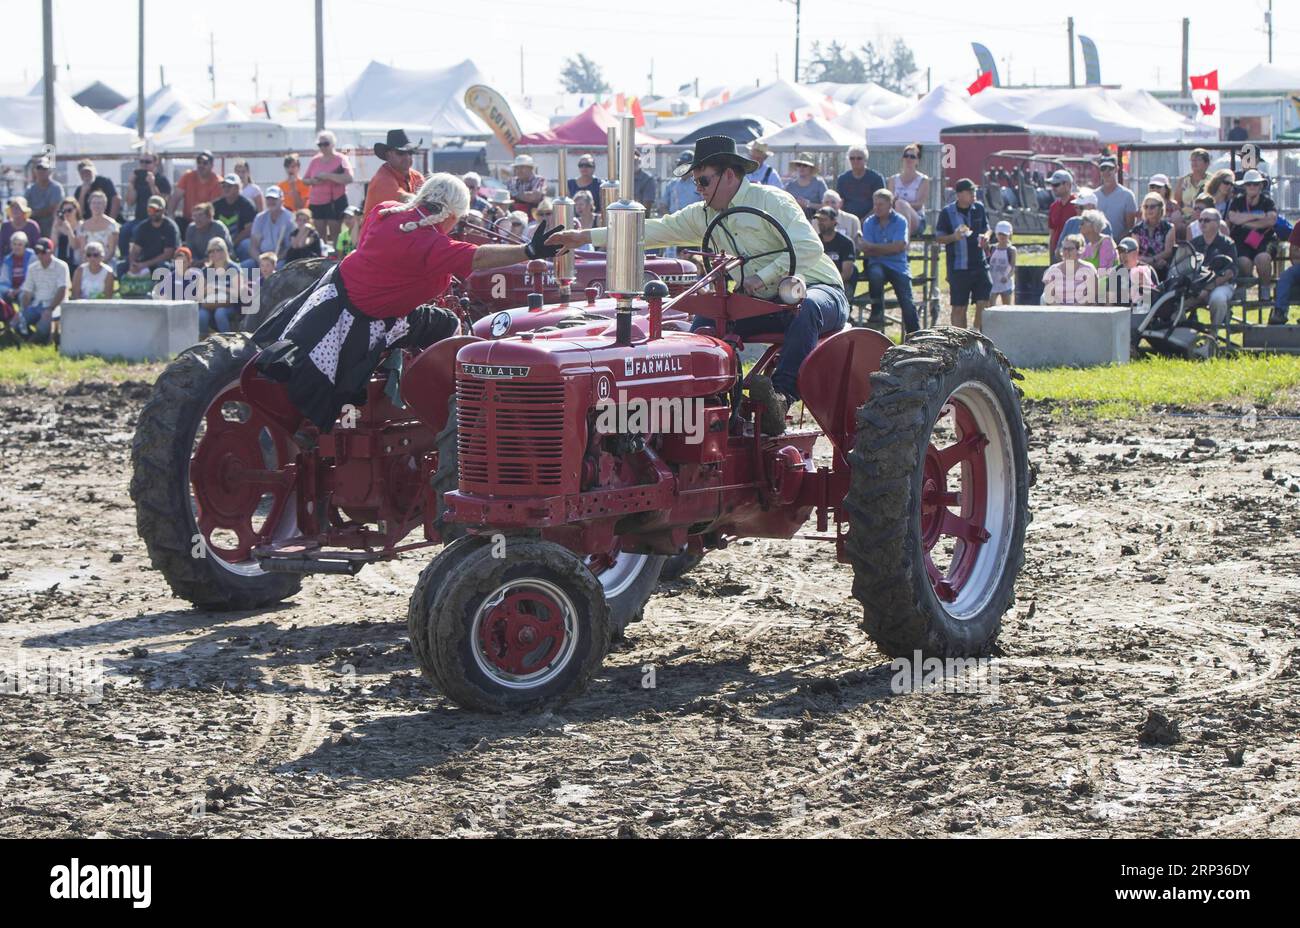 (180922) -- TORONTO, Sept. 22, 2018 -- Drivers perform with their tractors during the Dancing Tractors Show of the 2018 International Plowing Match and Rural Expo in Chatham-Kent, Ontario, Canada, Sept. 21, 2018. ) (jmmn) CANADA-ONTARIO-CHATHAM KENT-IPM-DANCING TRACTORS ZouxZheng PUBLICATIONxNOTxINxCHN Stock Photo